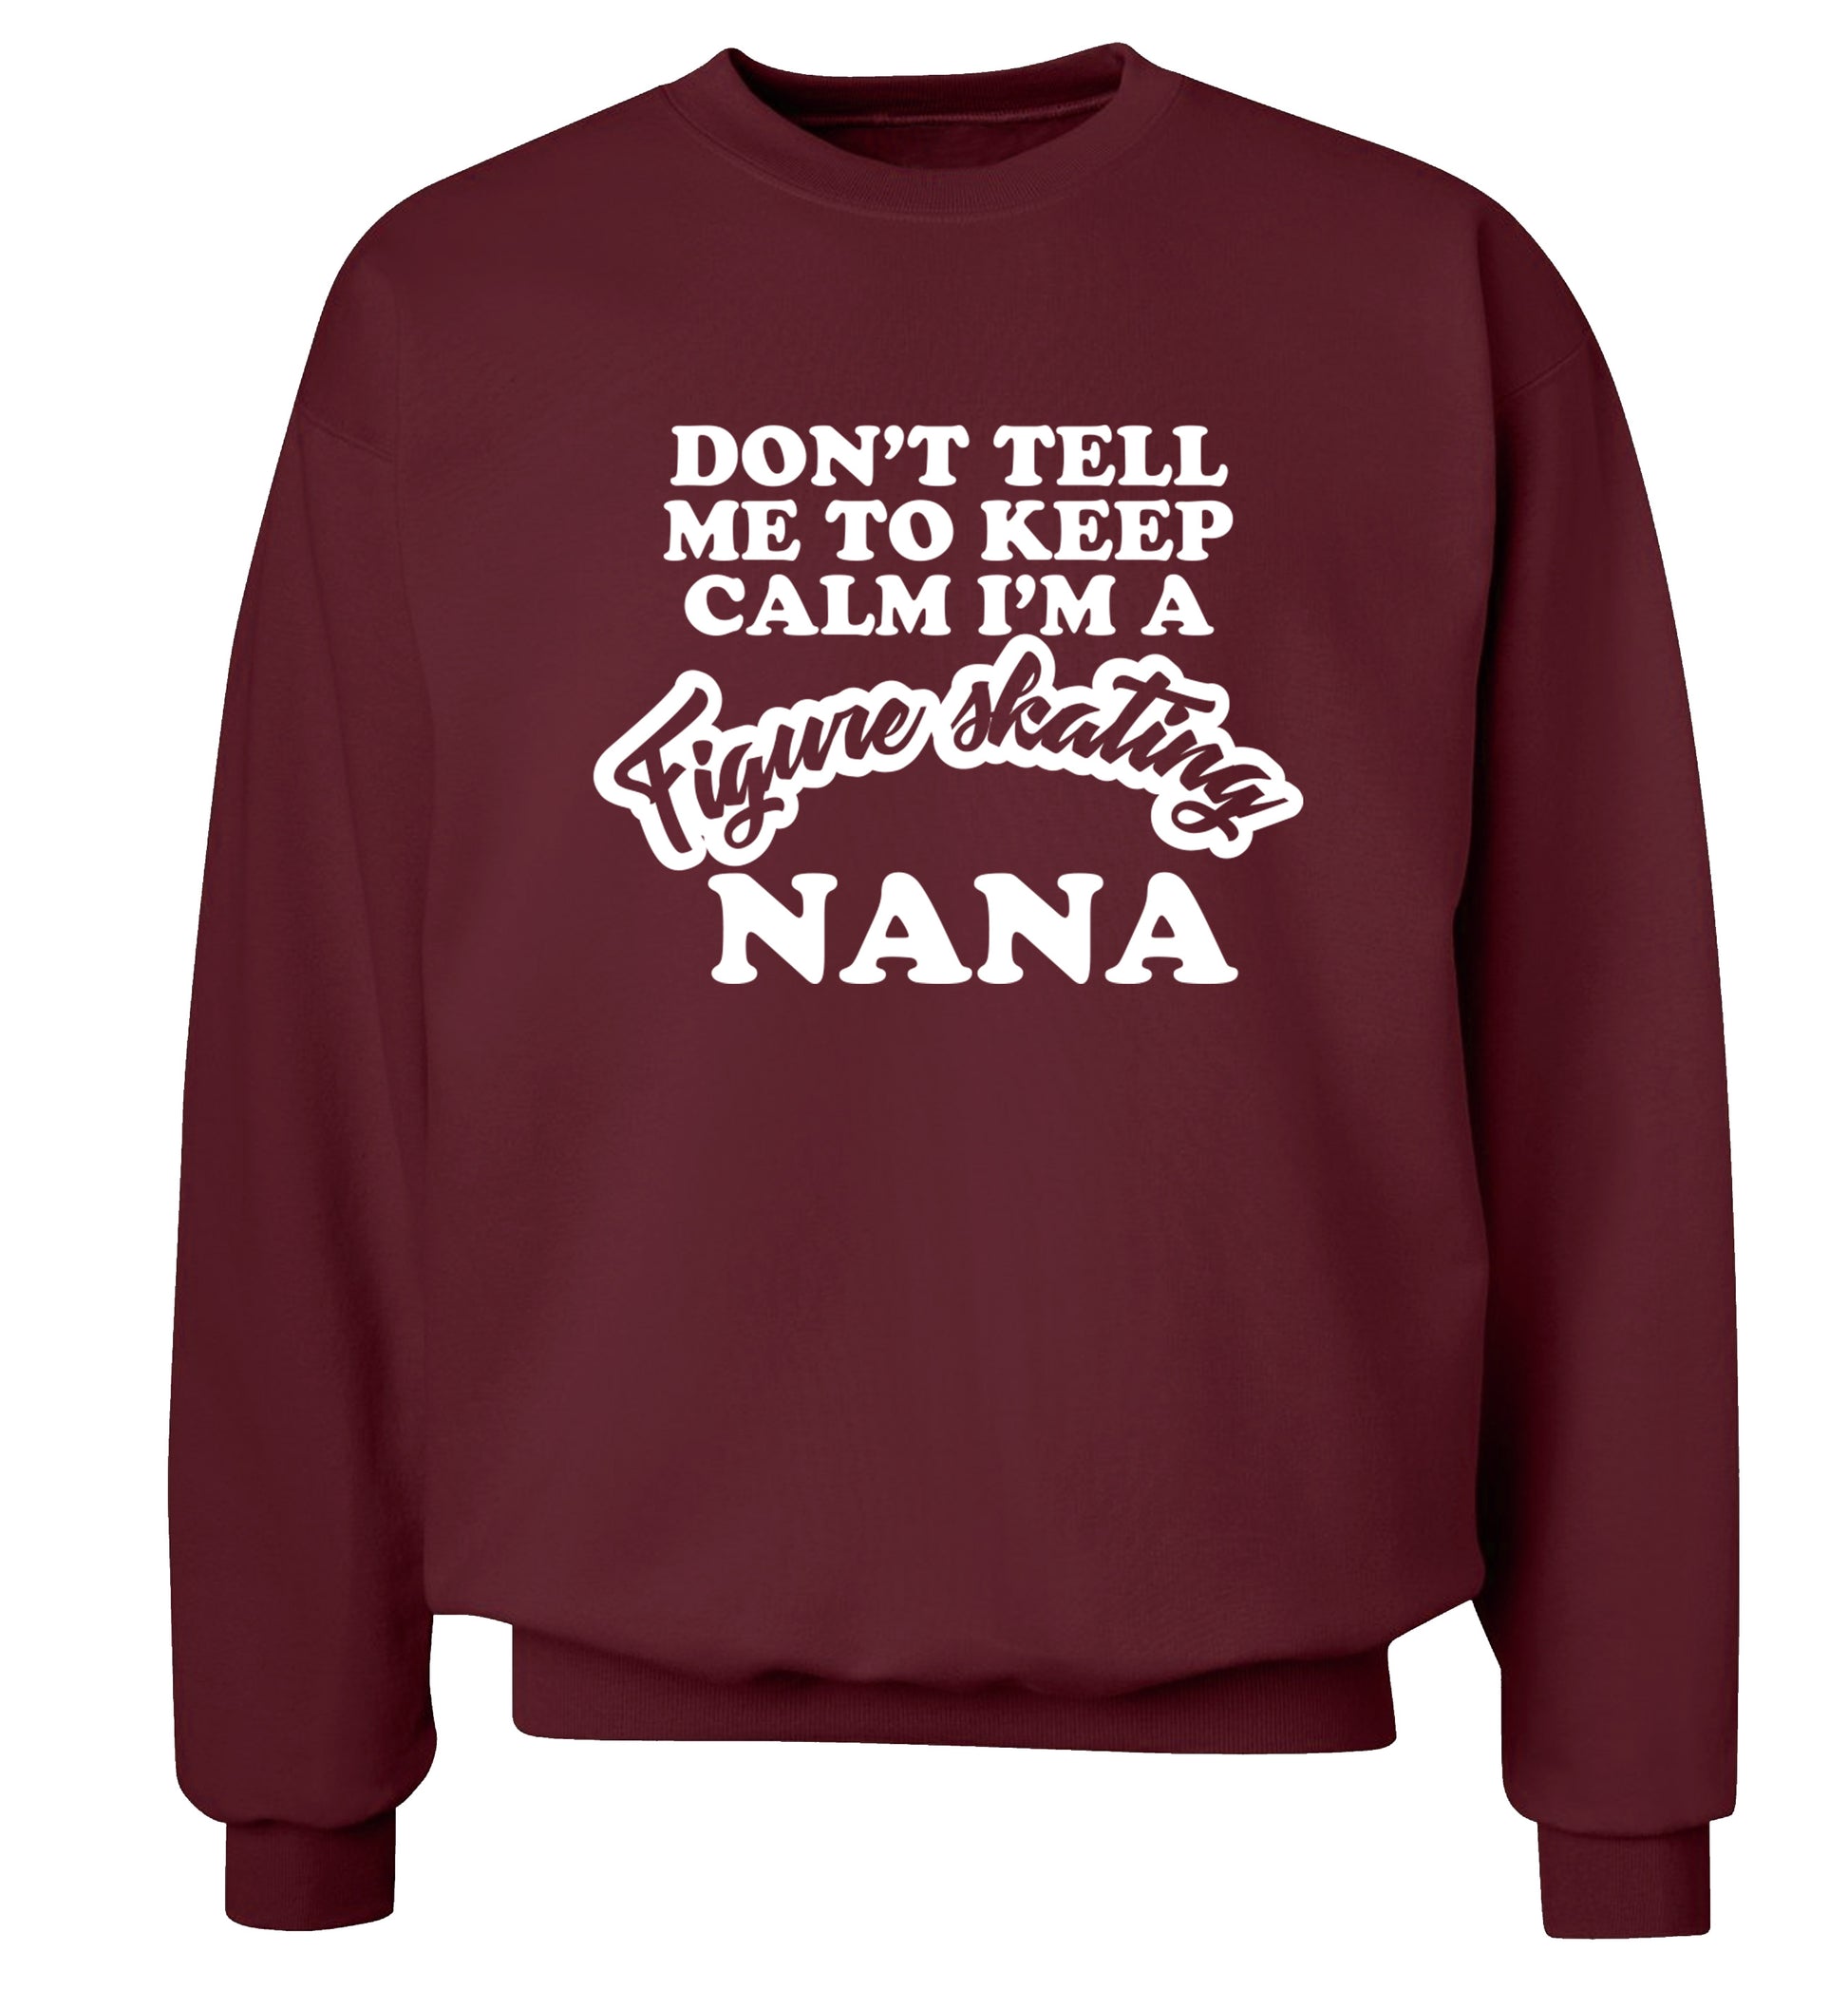 Don't tell me to keep calm I'm a figure skating nana Adult's unisexmaroon Sweater 2XL